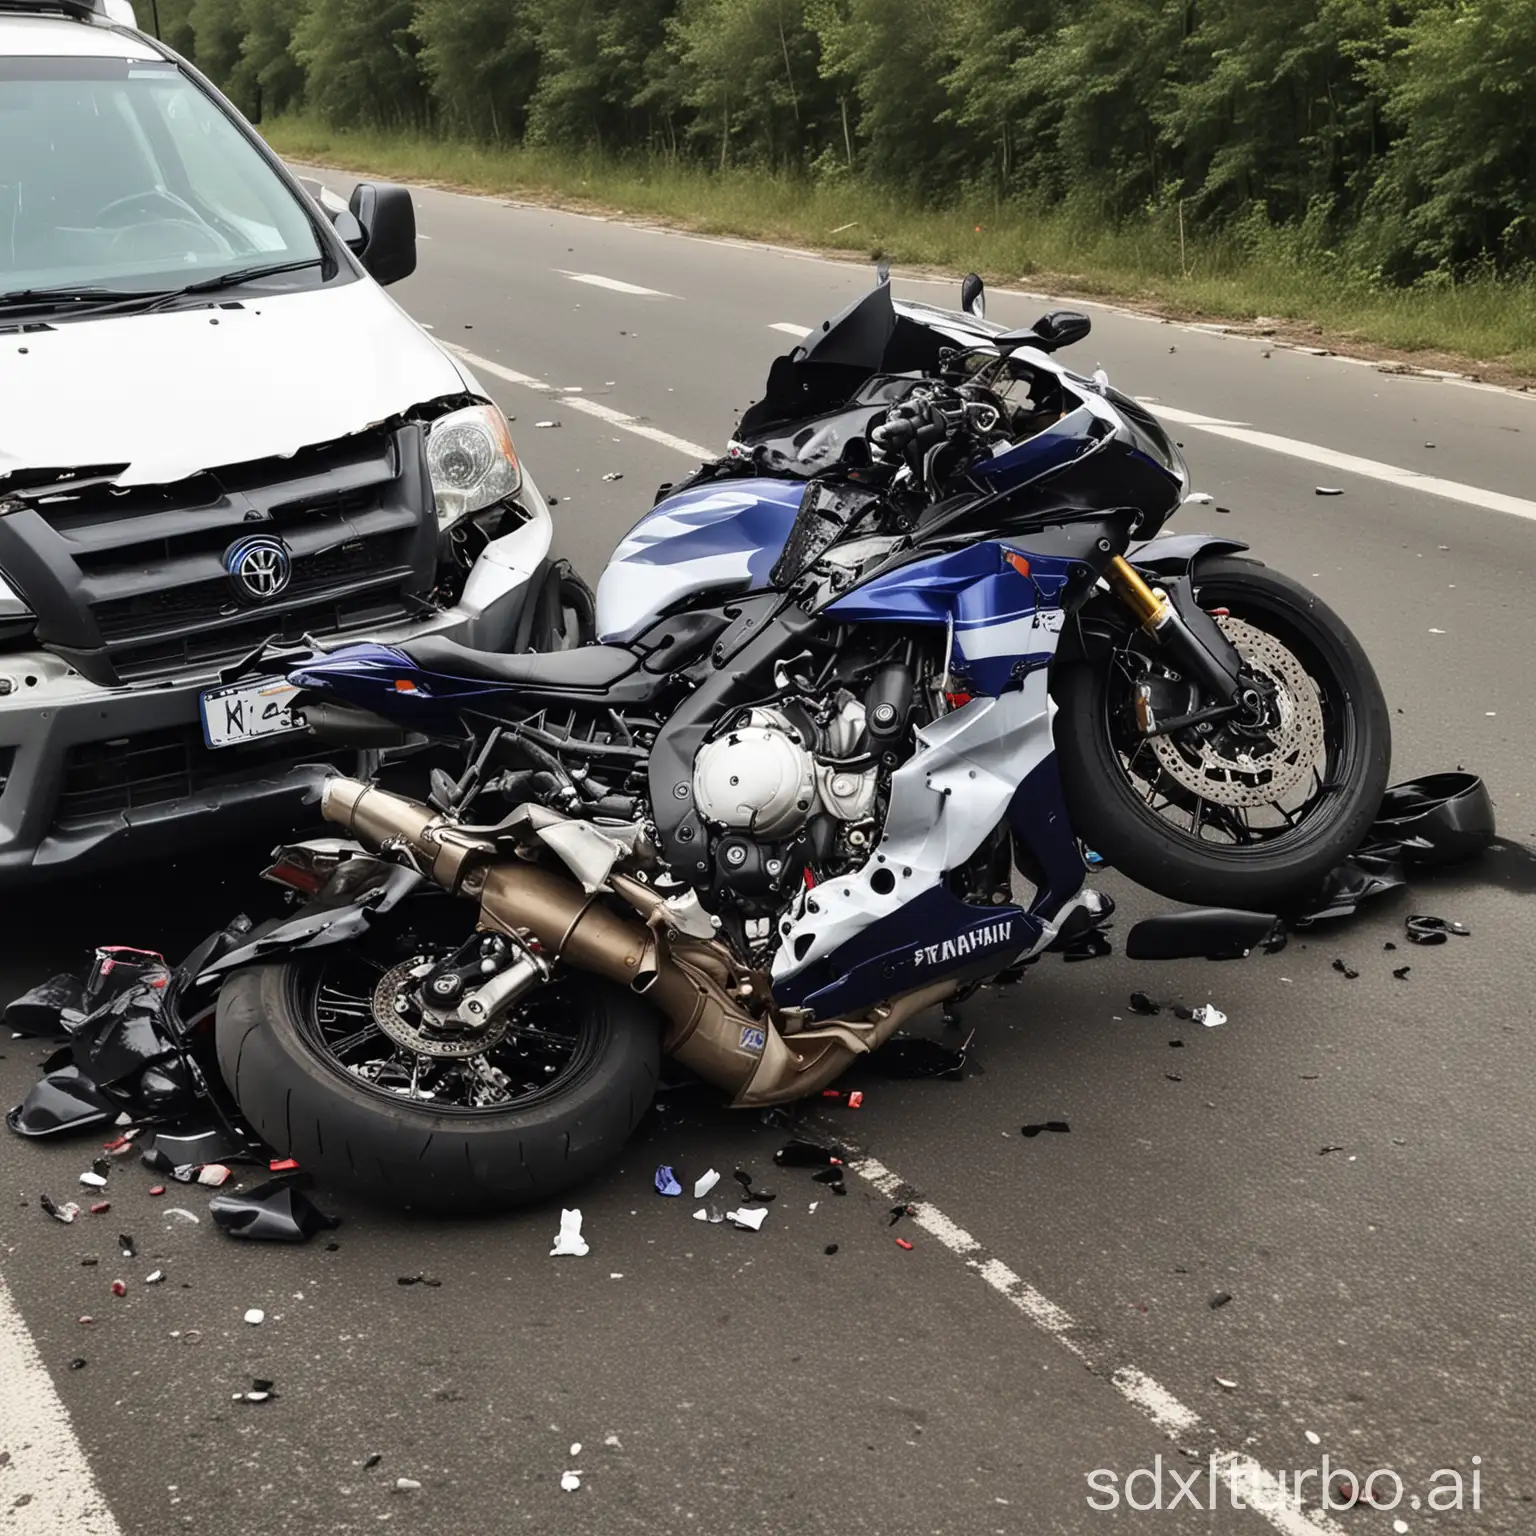 Accident Yamaha R1 crashed into a truck